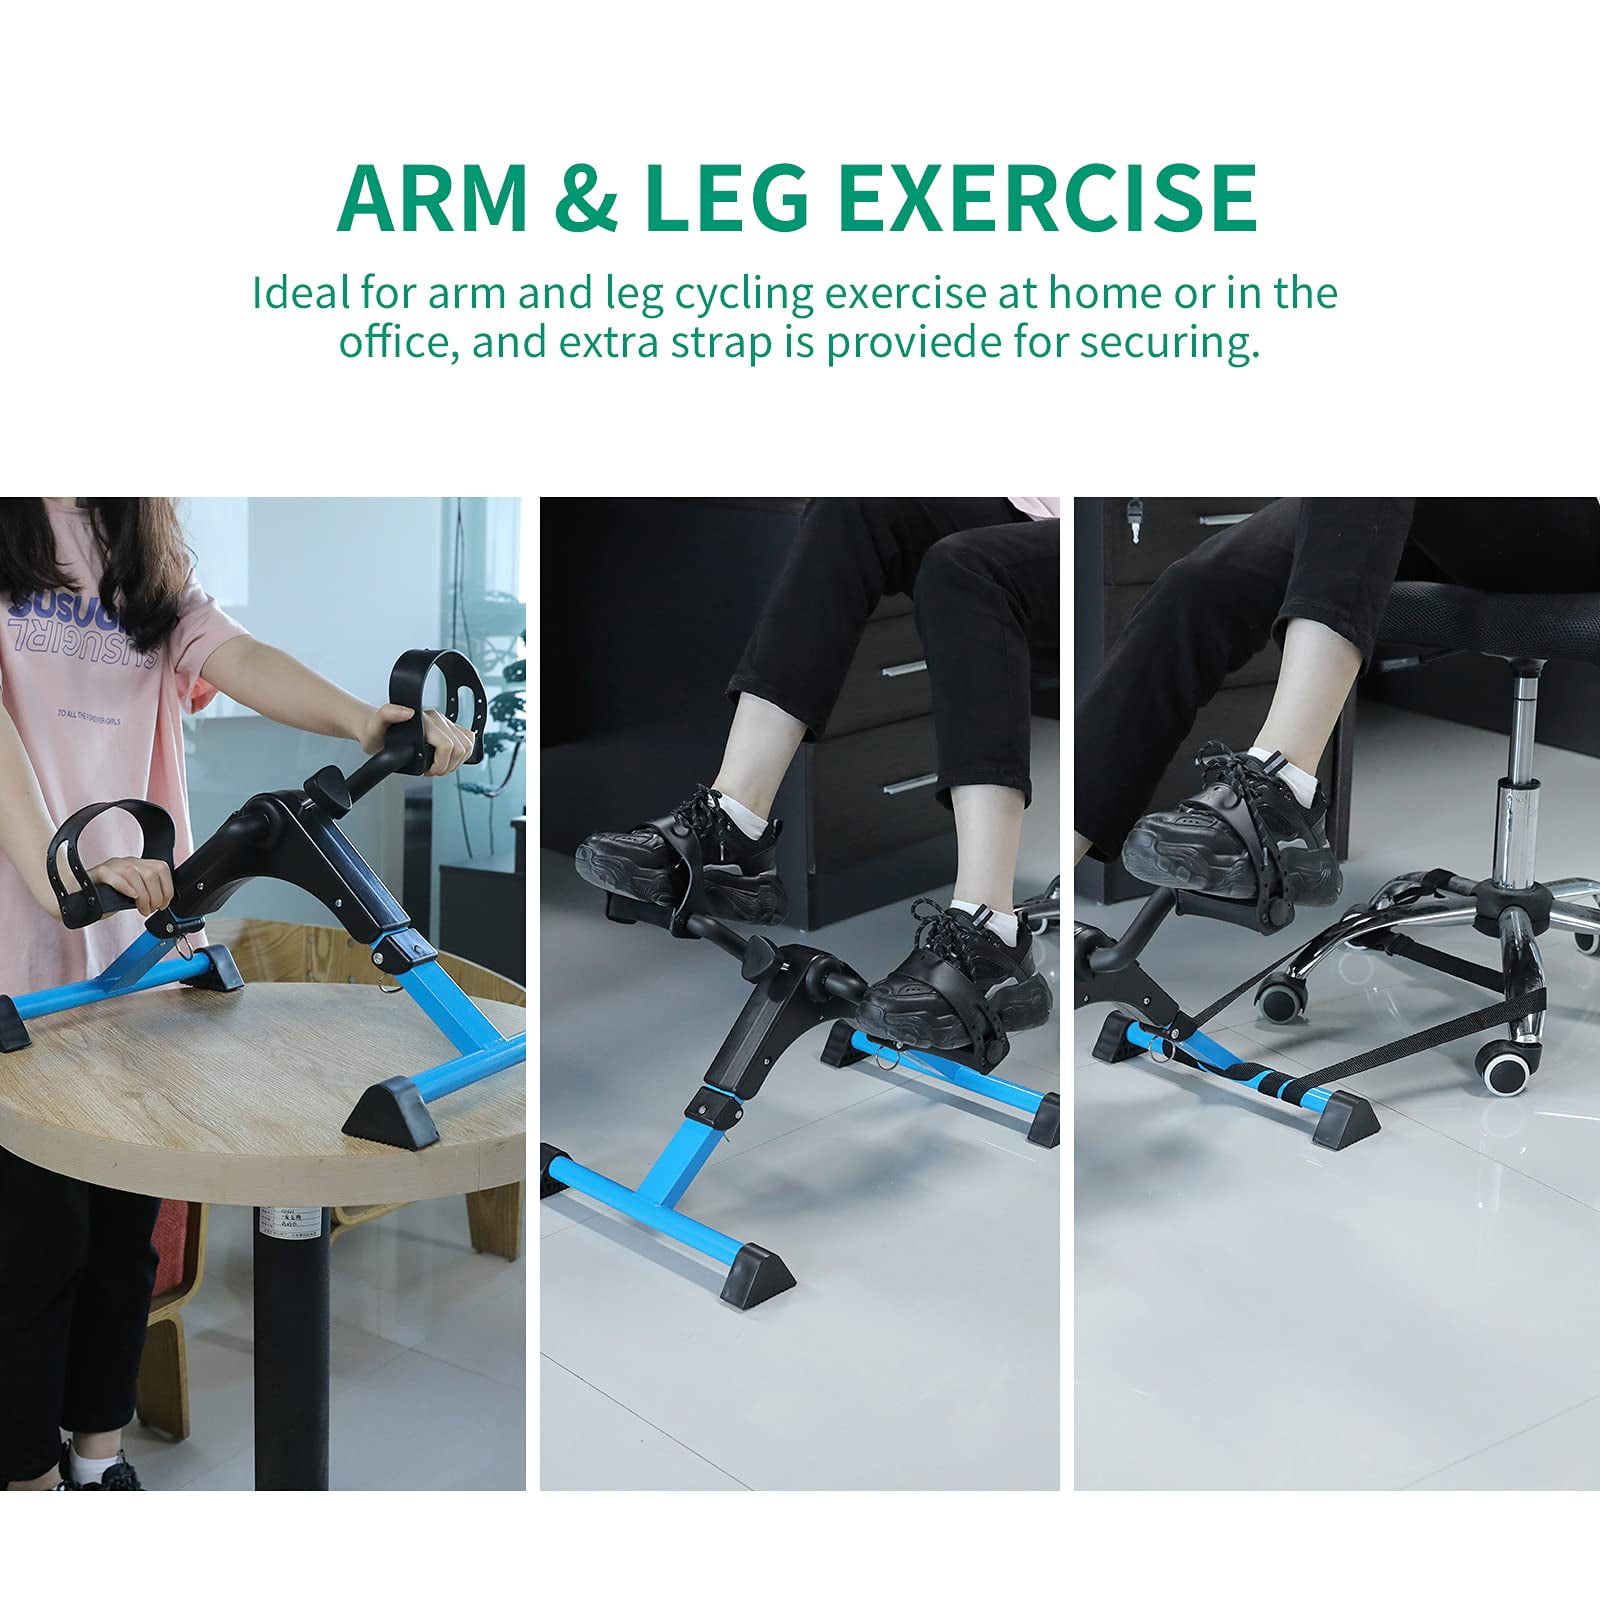 Portable Pedal Exerciser by Vive Arm